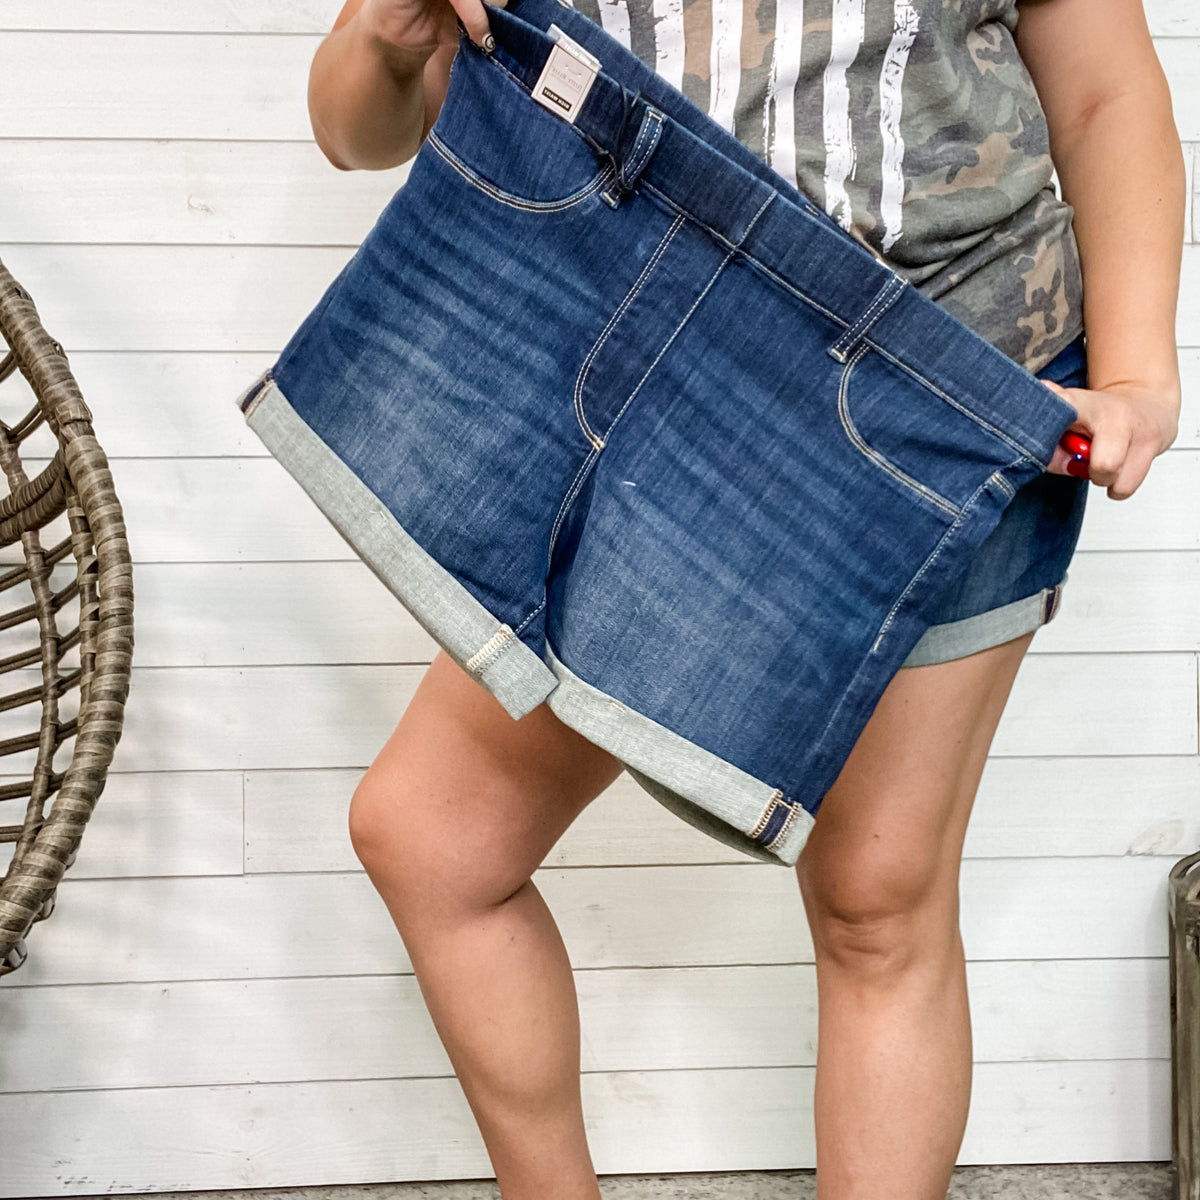 Judy Blue "Double Take" Jeggings Shorts